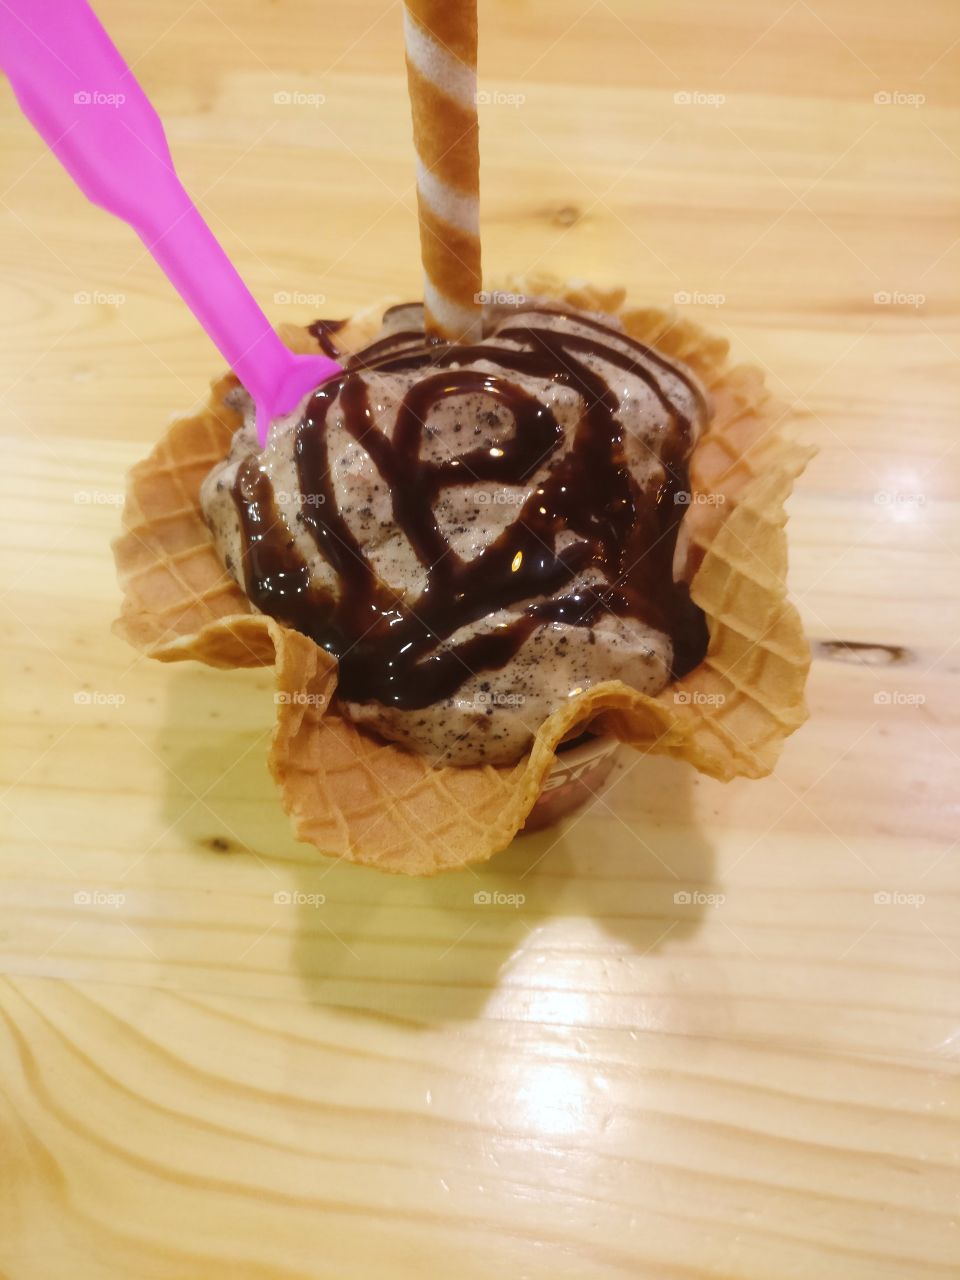 chocolate ice cream in a wafer cup